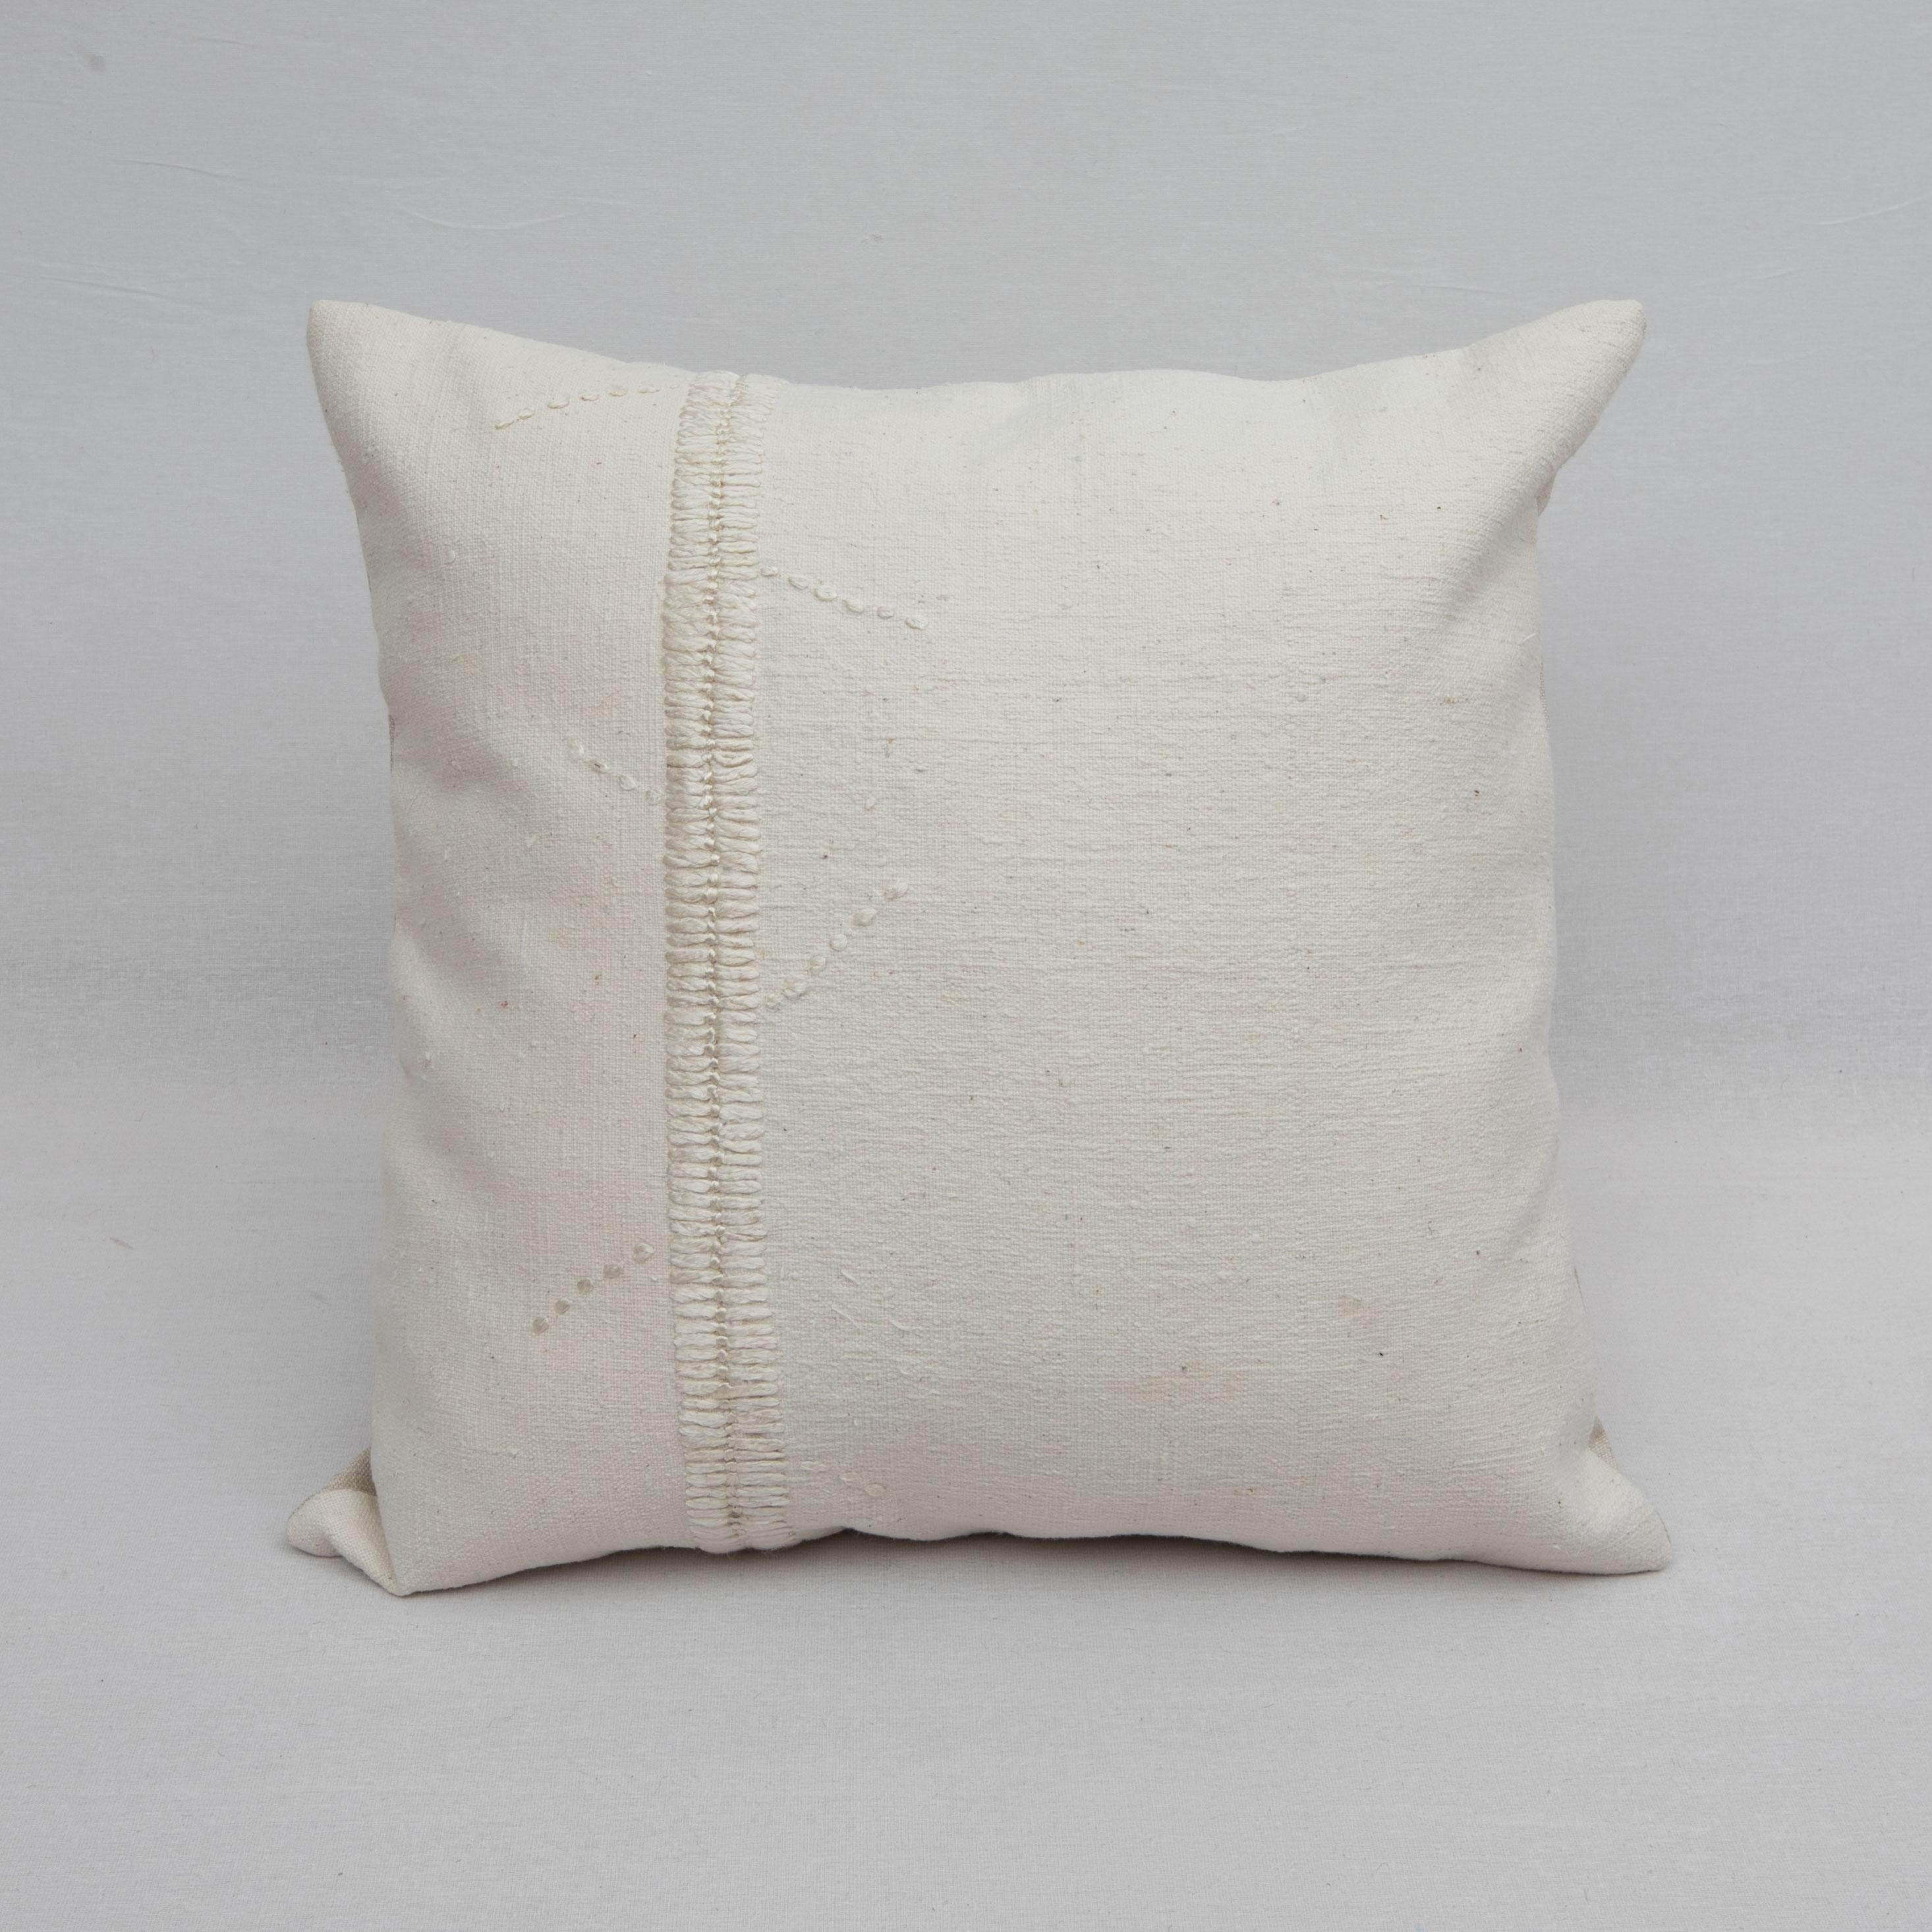 This Pillow case id made from a vintage cotton coverlet made during mid 20th c. in Southern Anatolia, Turkey. The silk stitching on it is hand done by us.

It does not come with an insert.
Linen in the back.
Zipper closure.
Dry cleaning is